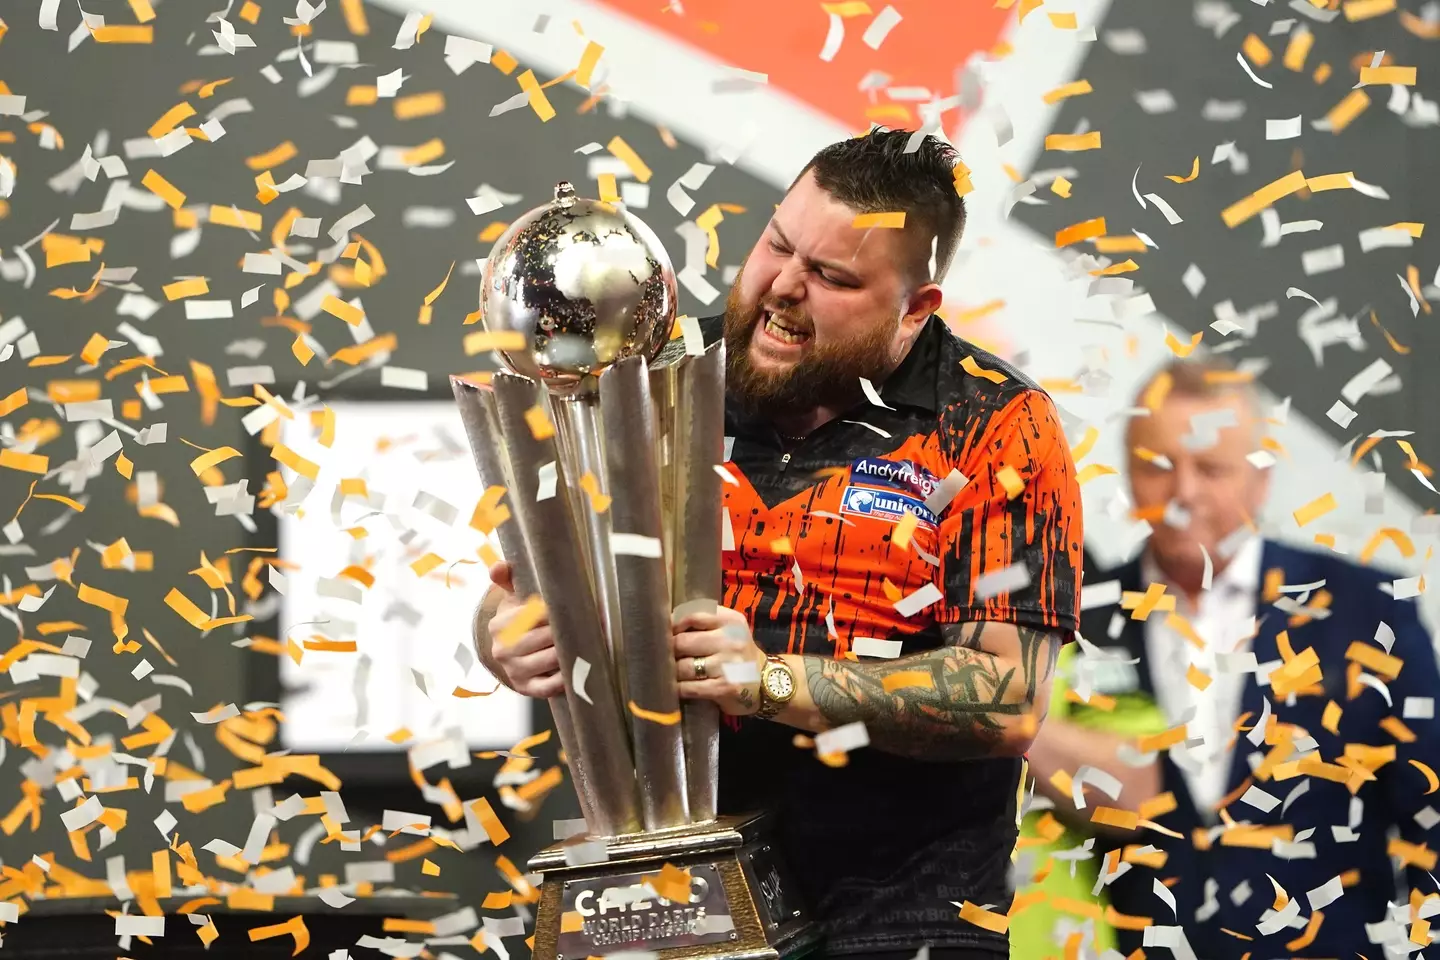 World No 1 Michael Smith celebrates his stunning win over Michael van Gerwen in the 2023 PDC World Darts Championship final.